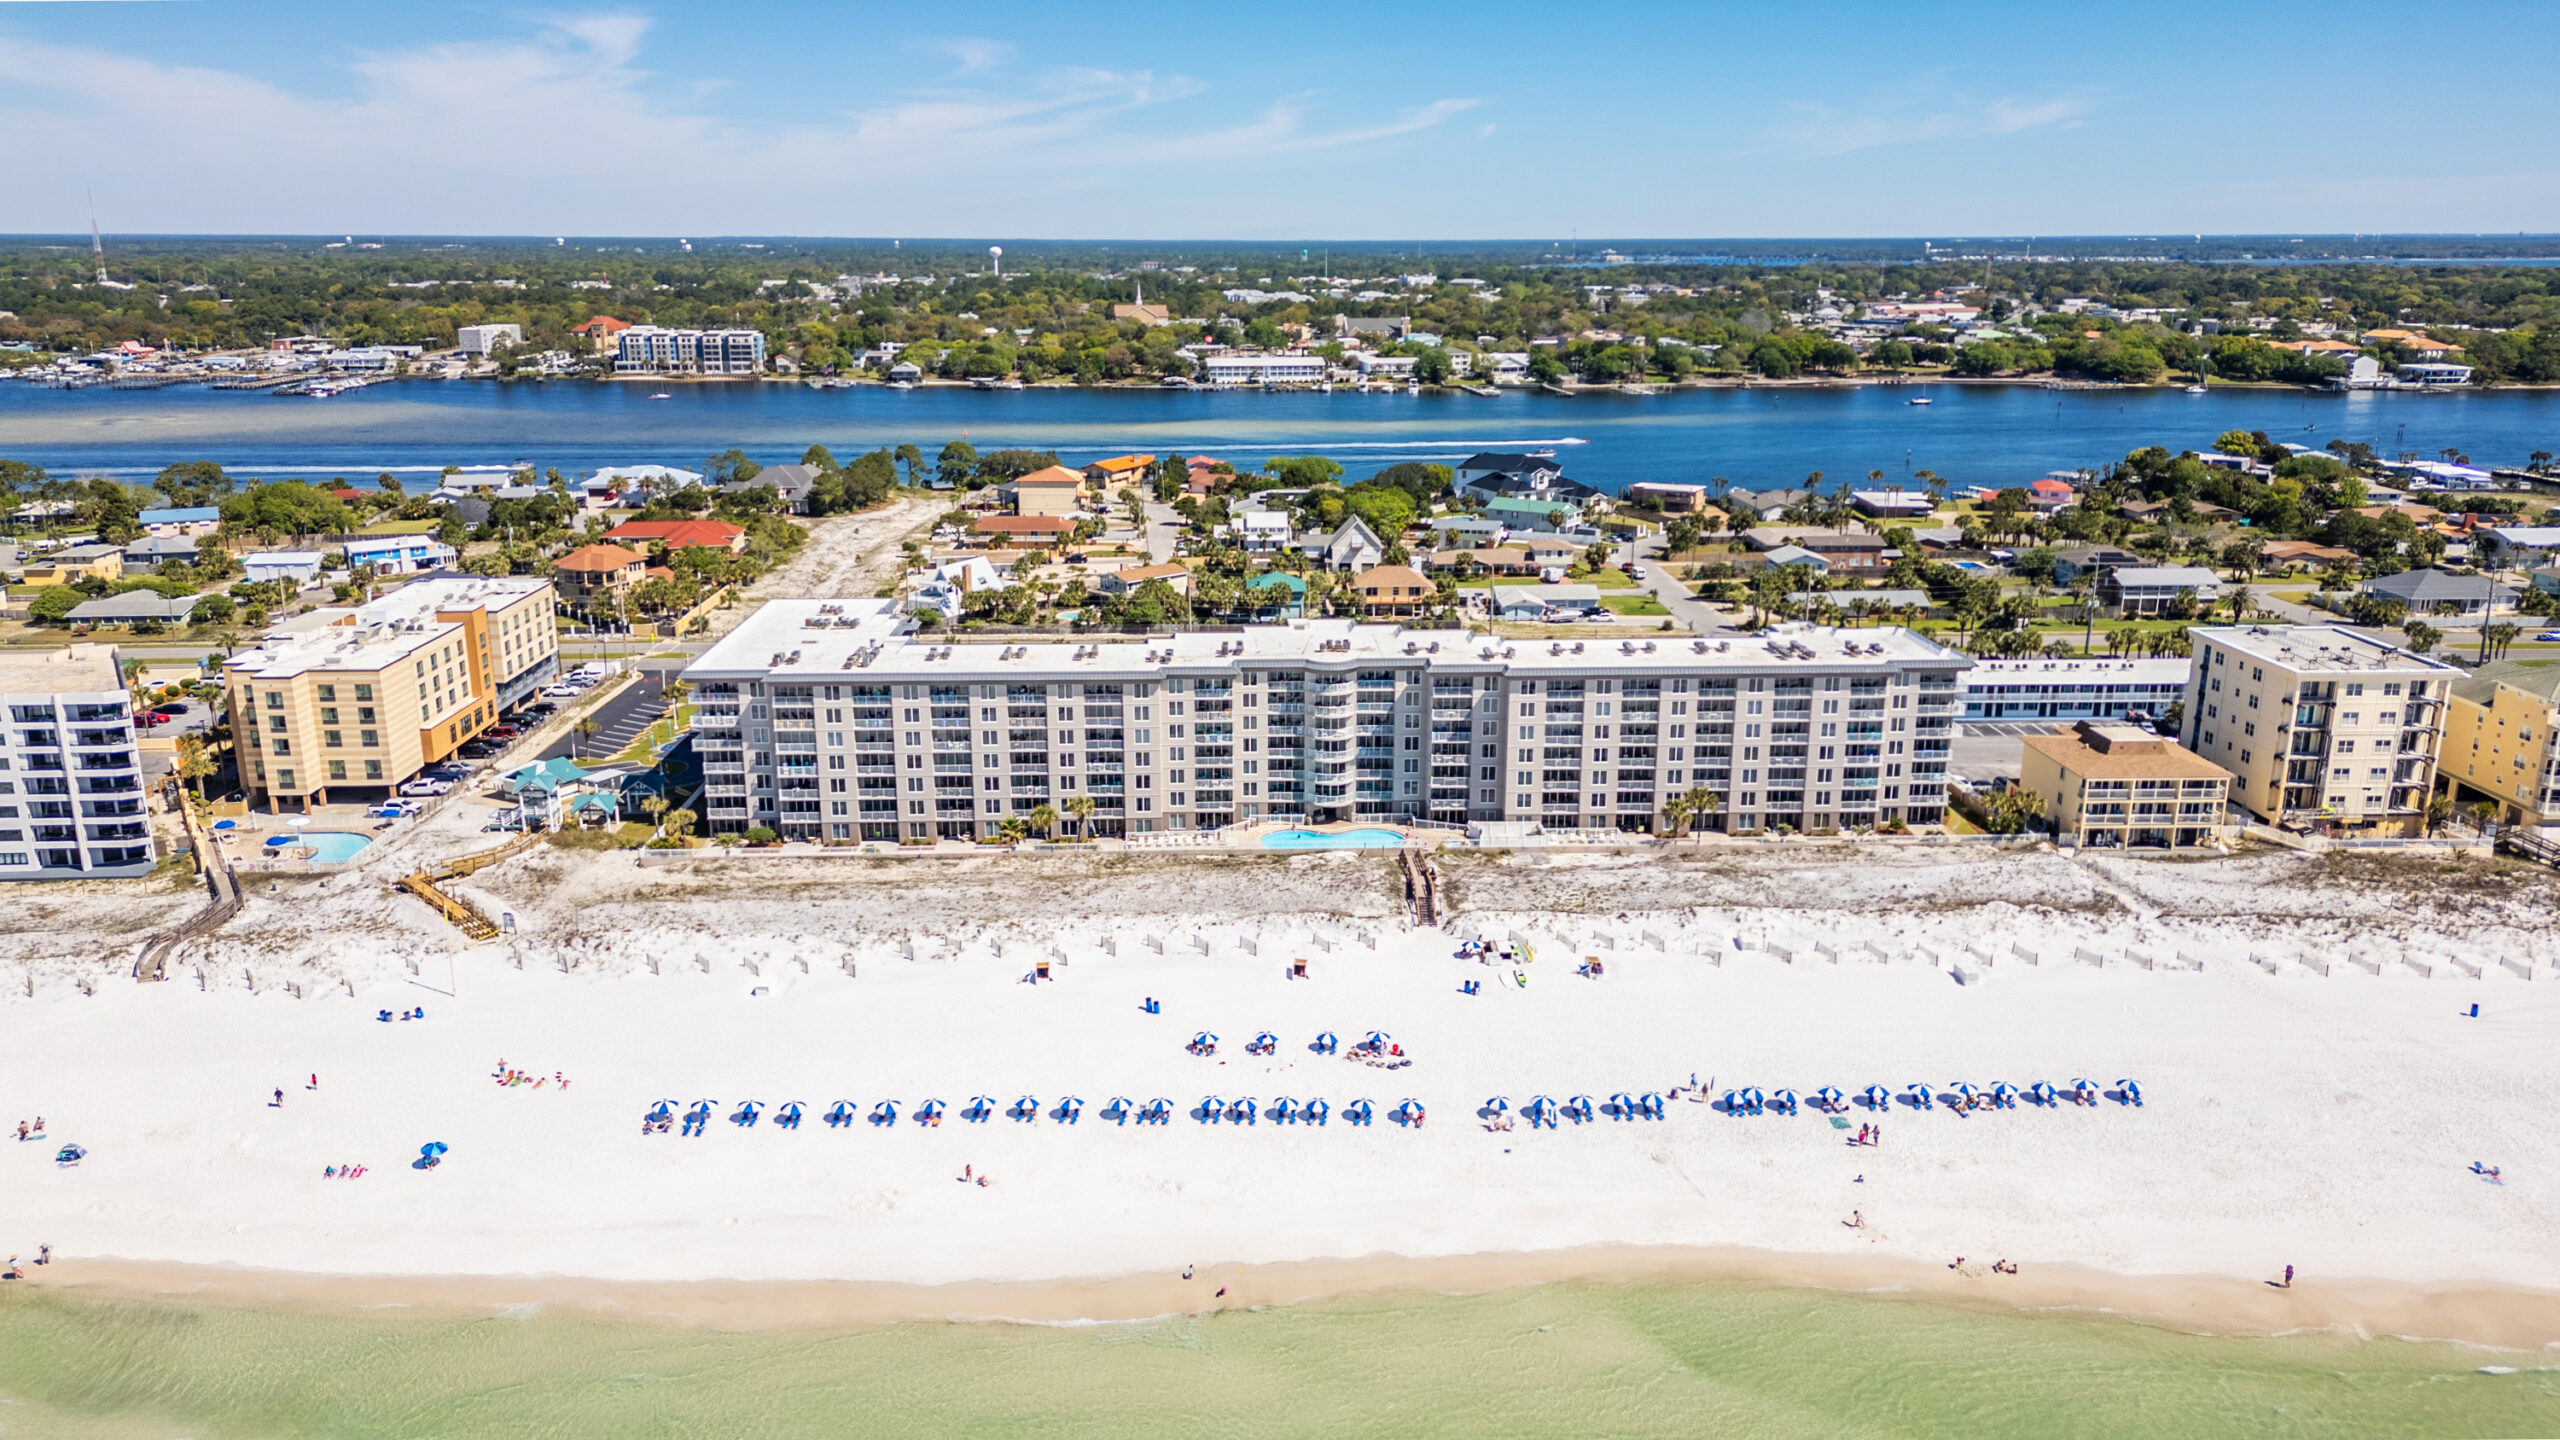 Owners provide complimentary beach service for vacation rental guests